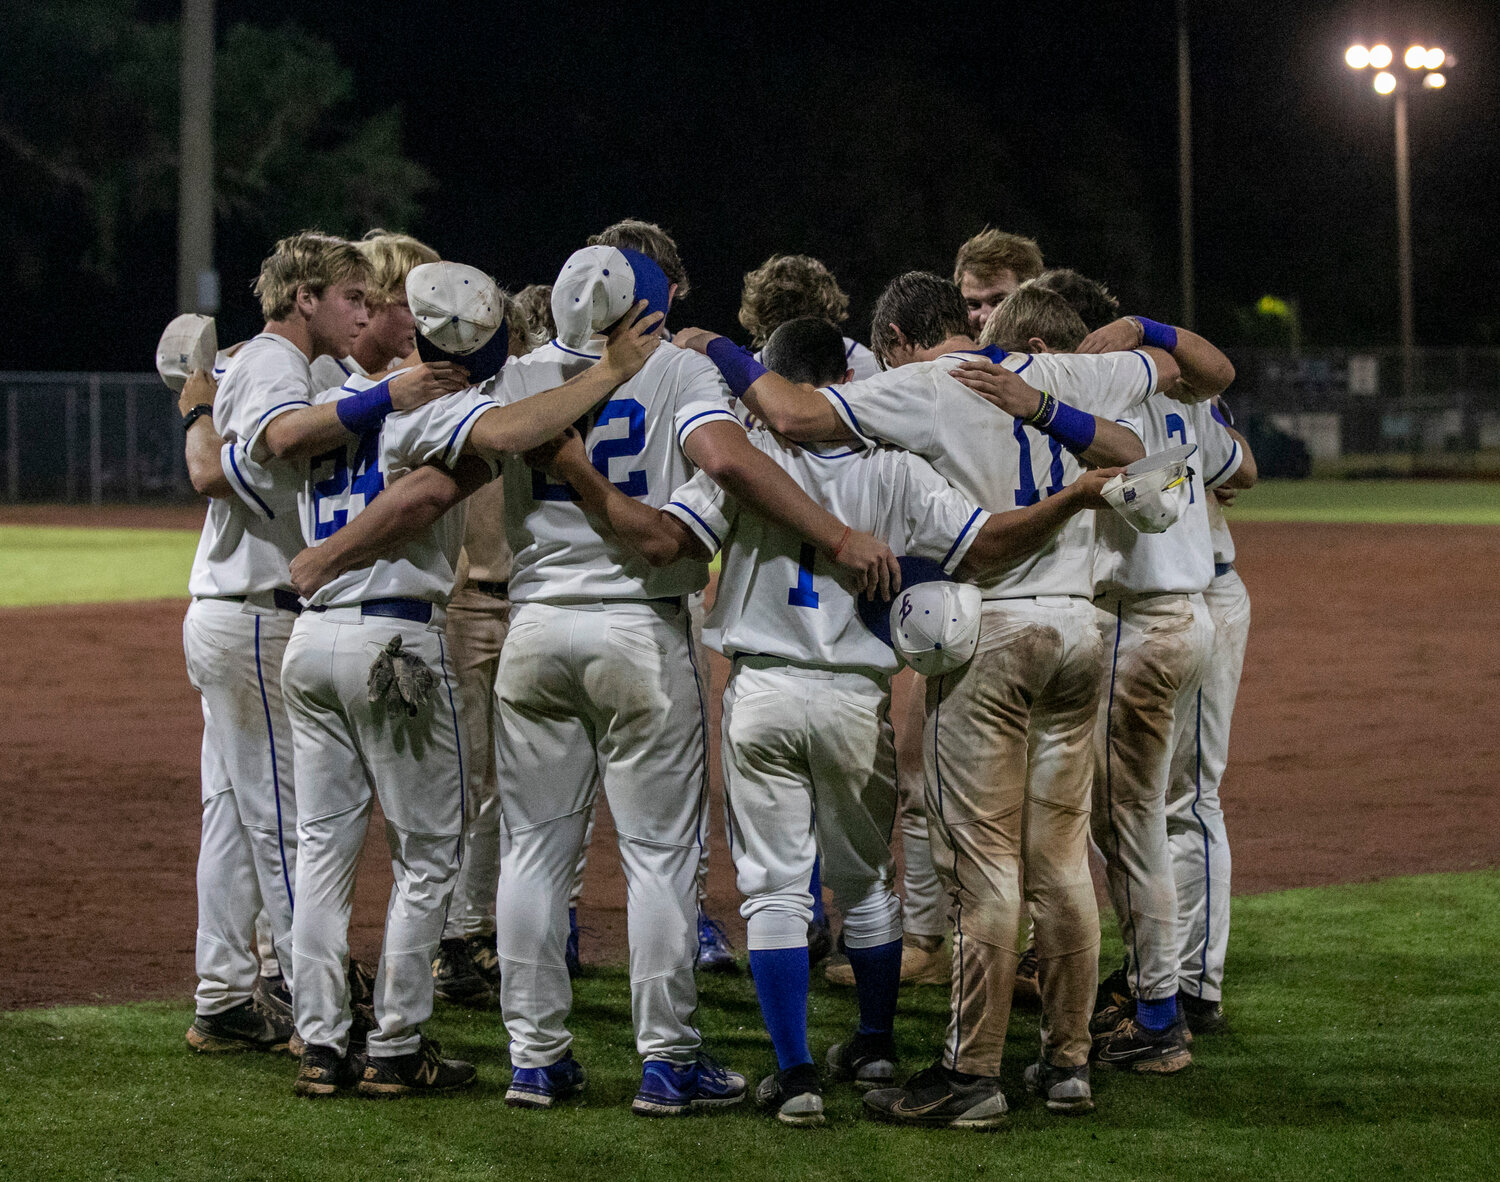 The Fairhope seniors meet for one last huddle together in the outfield of Mike Fillingim Field at Volanta Park after their season came to an end in the first round of the state playoffs to Smiths Station.